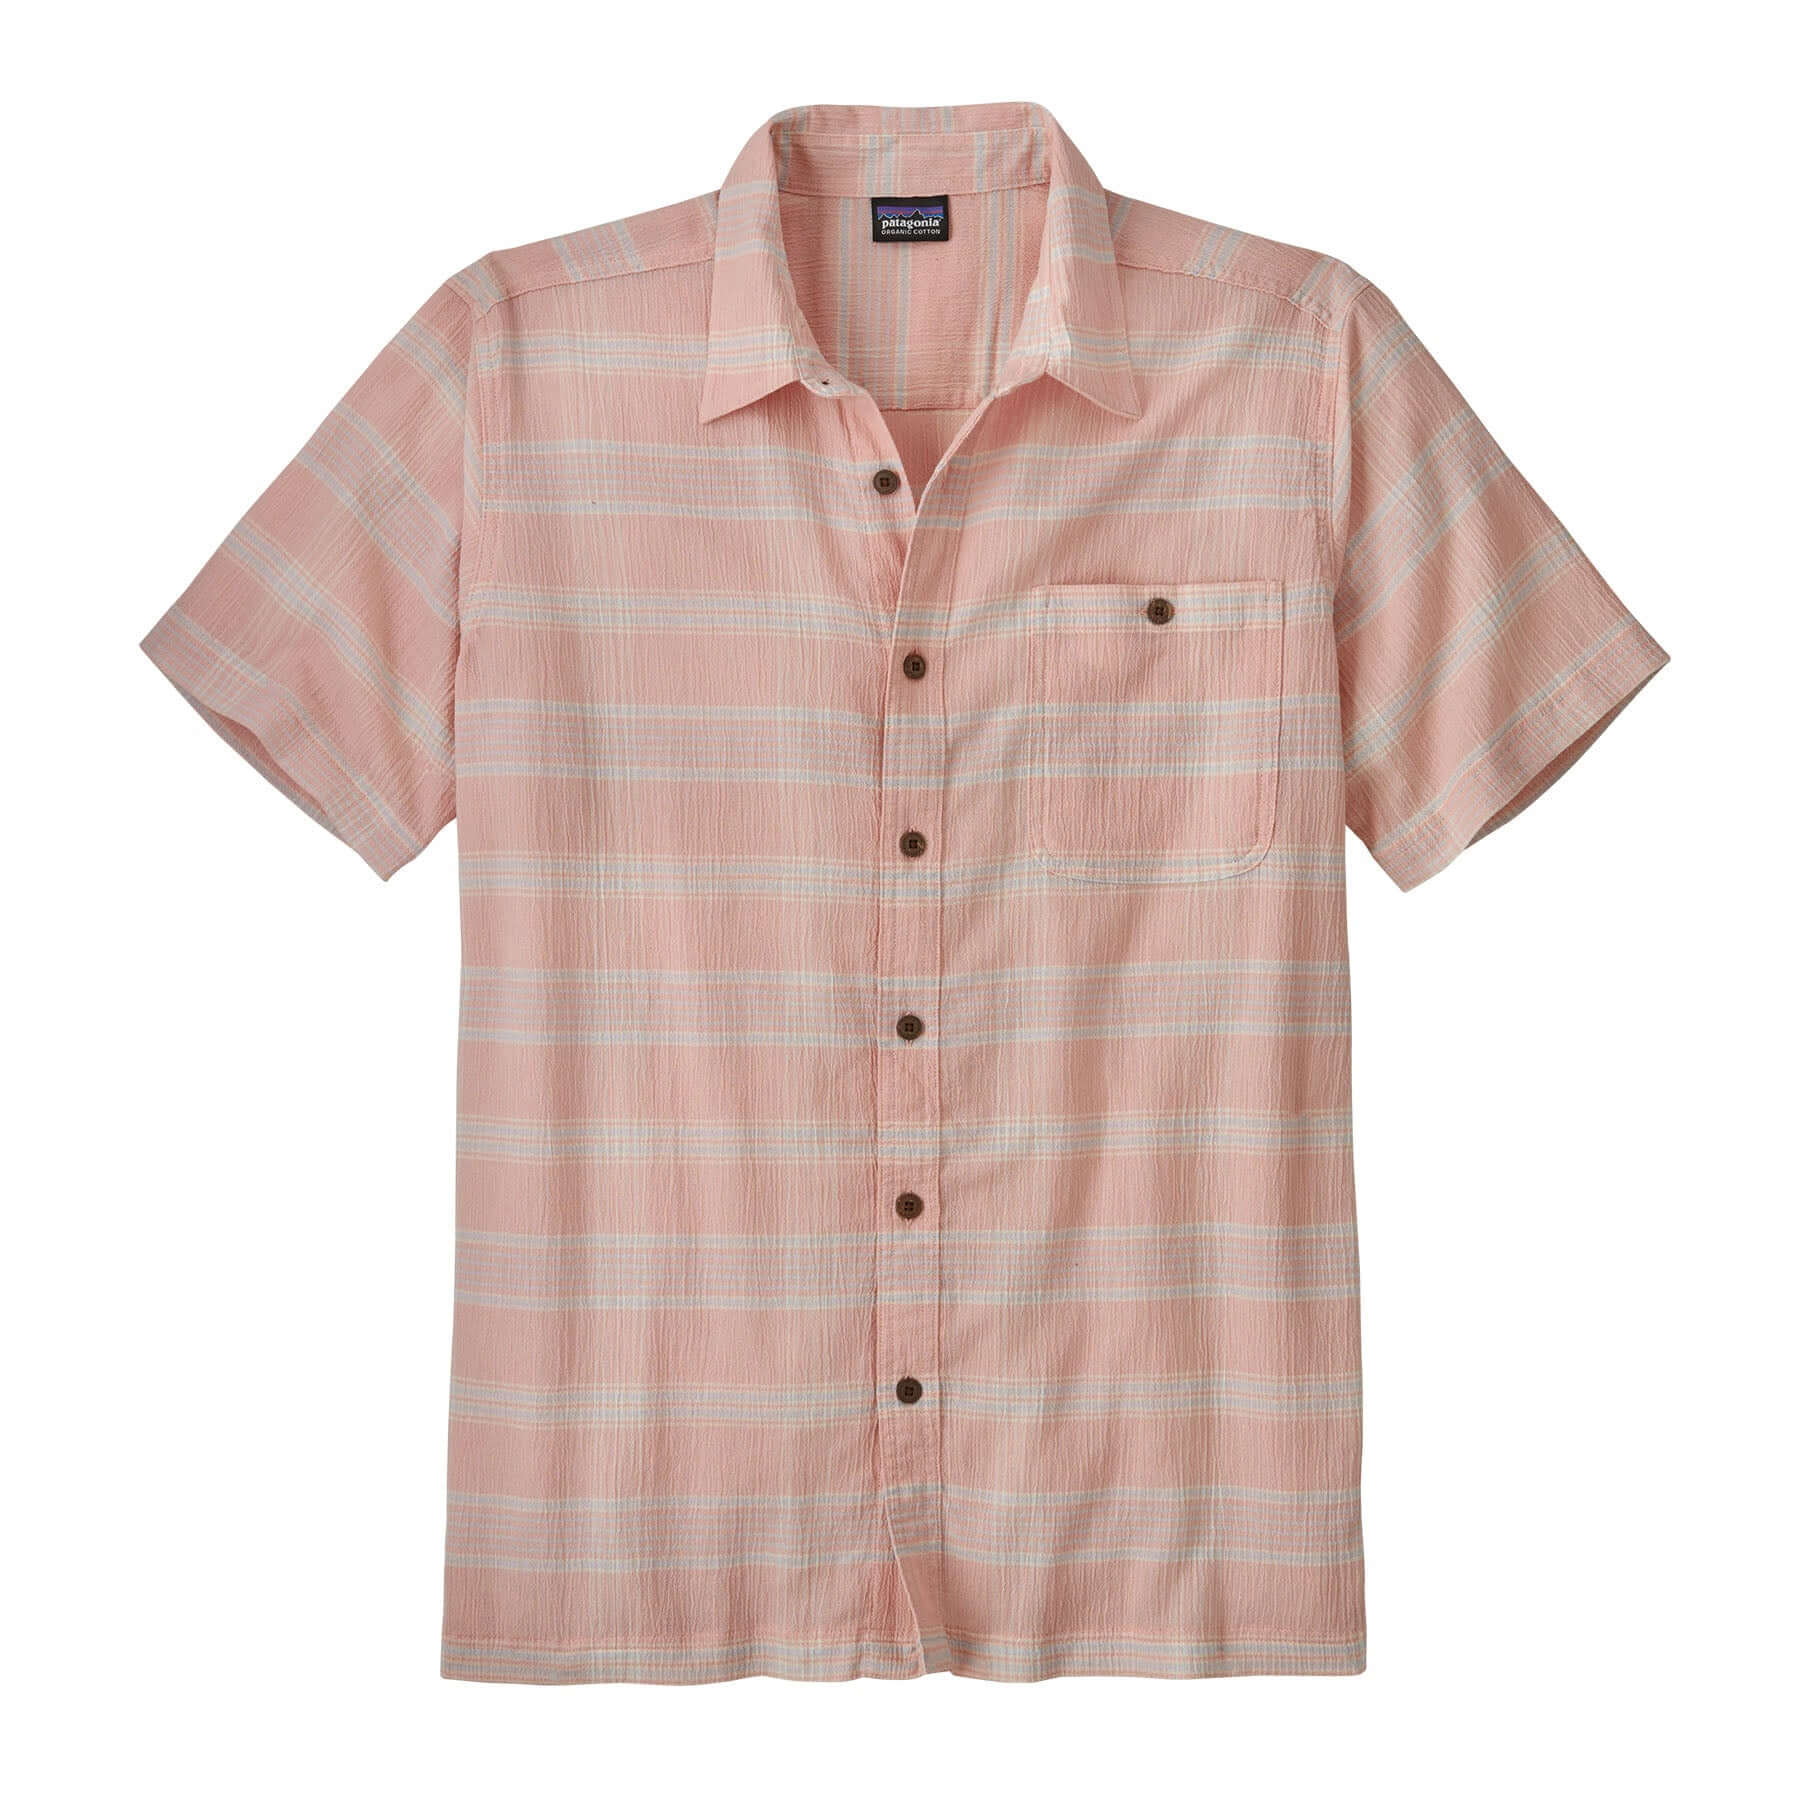 Men's A/C Shirt in Discovery: Whisker Pink | Patagonia Bend